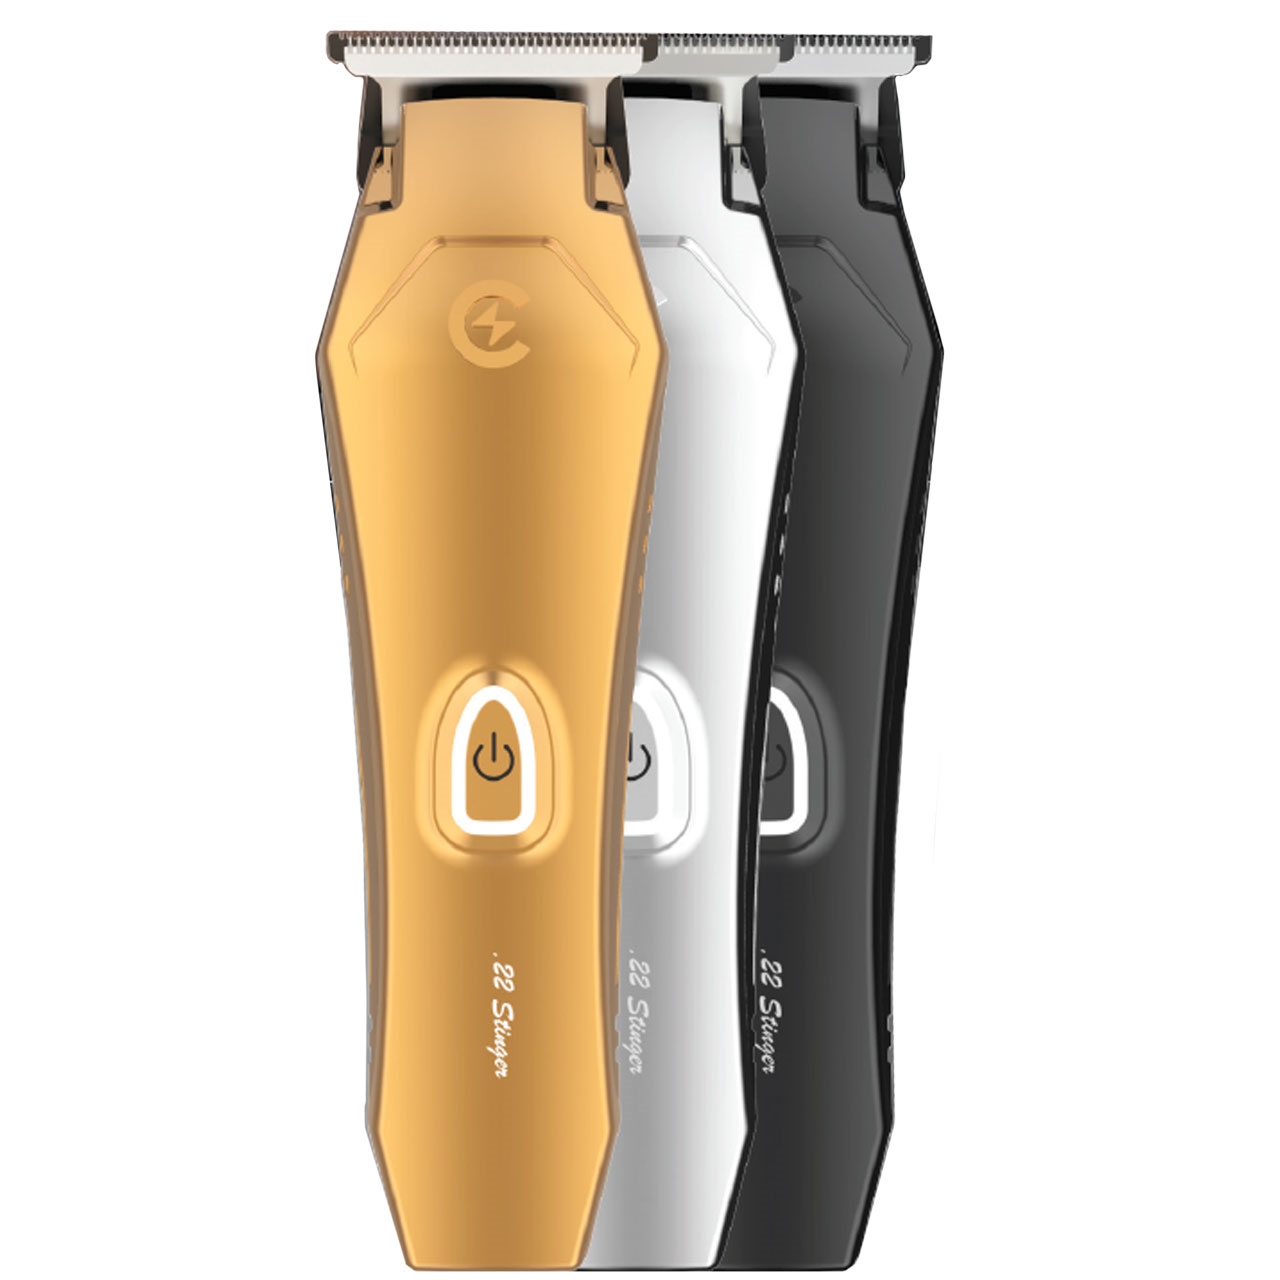 caliber pro clippers